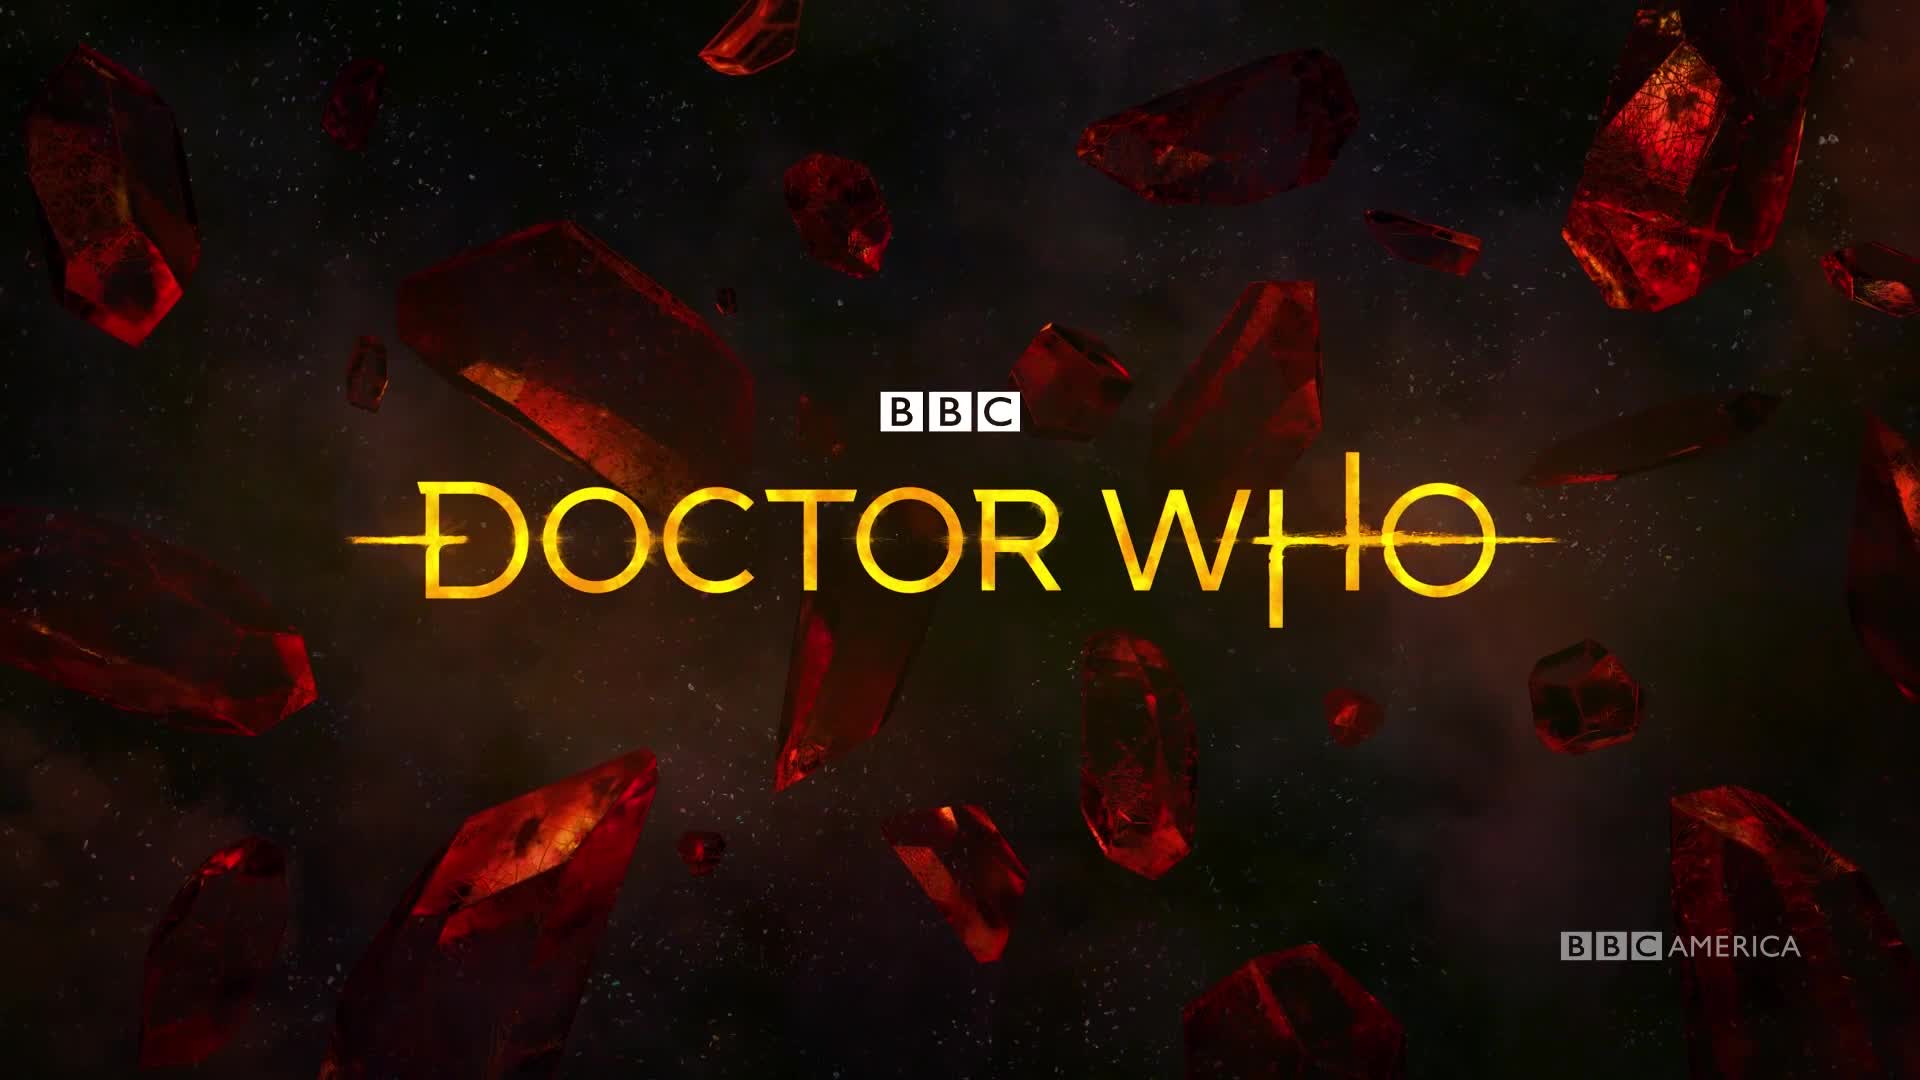 Doctor Who promo features &quot;It&#39;s A Good Day to Save the World&quot;